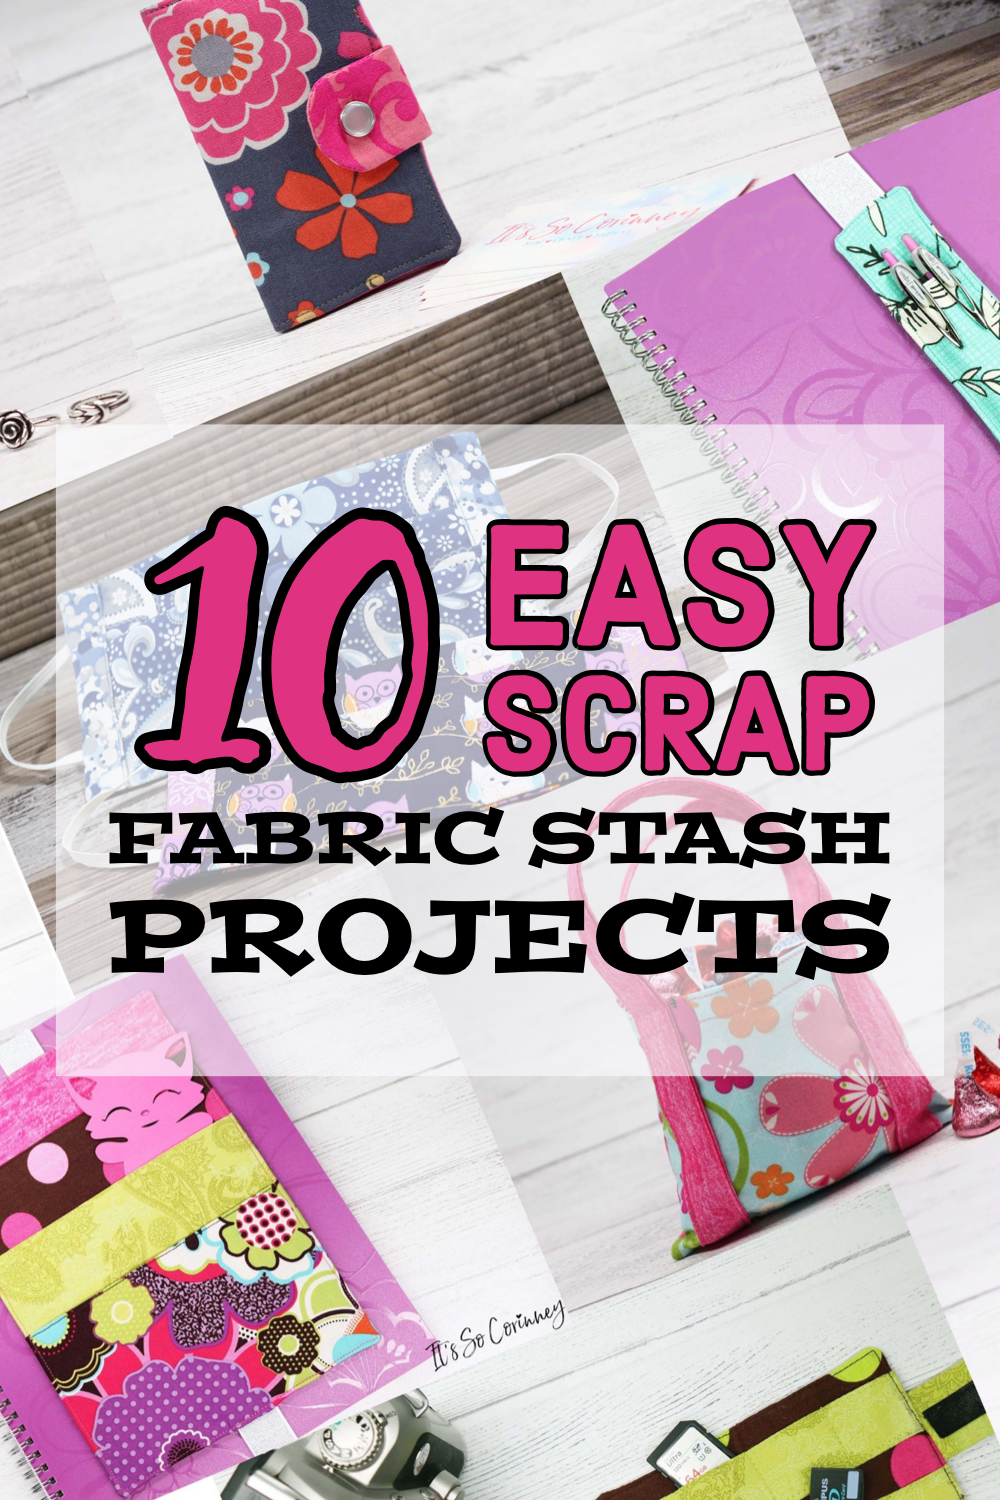 10 Easy Scrap Fabric Stash Projects